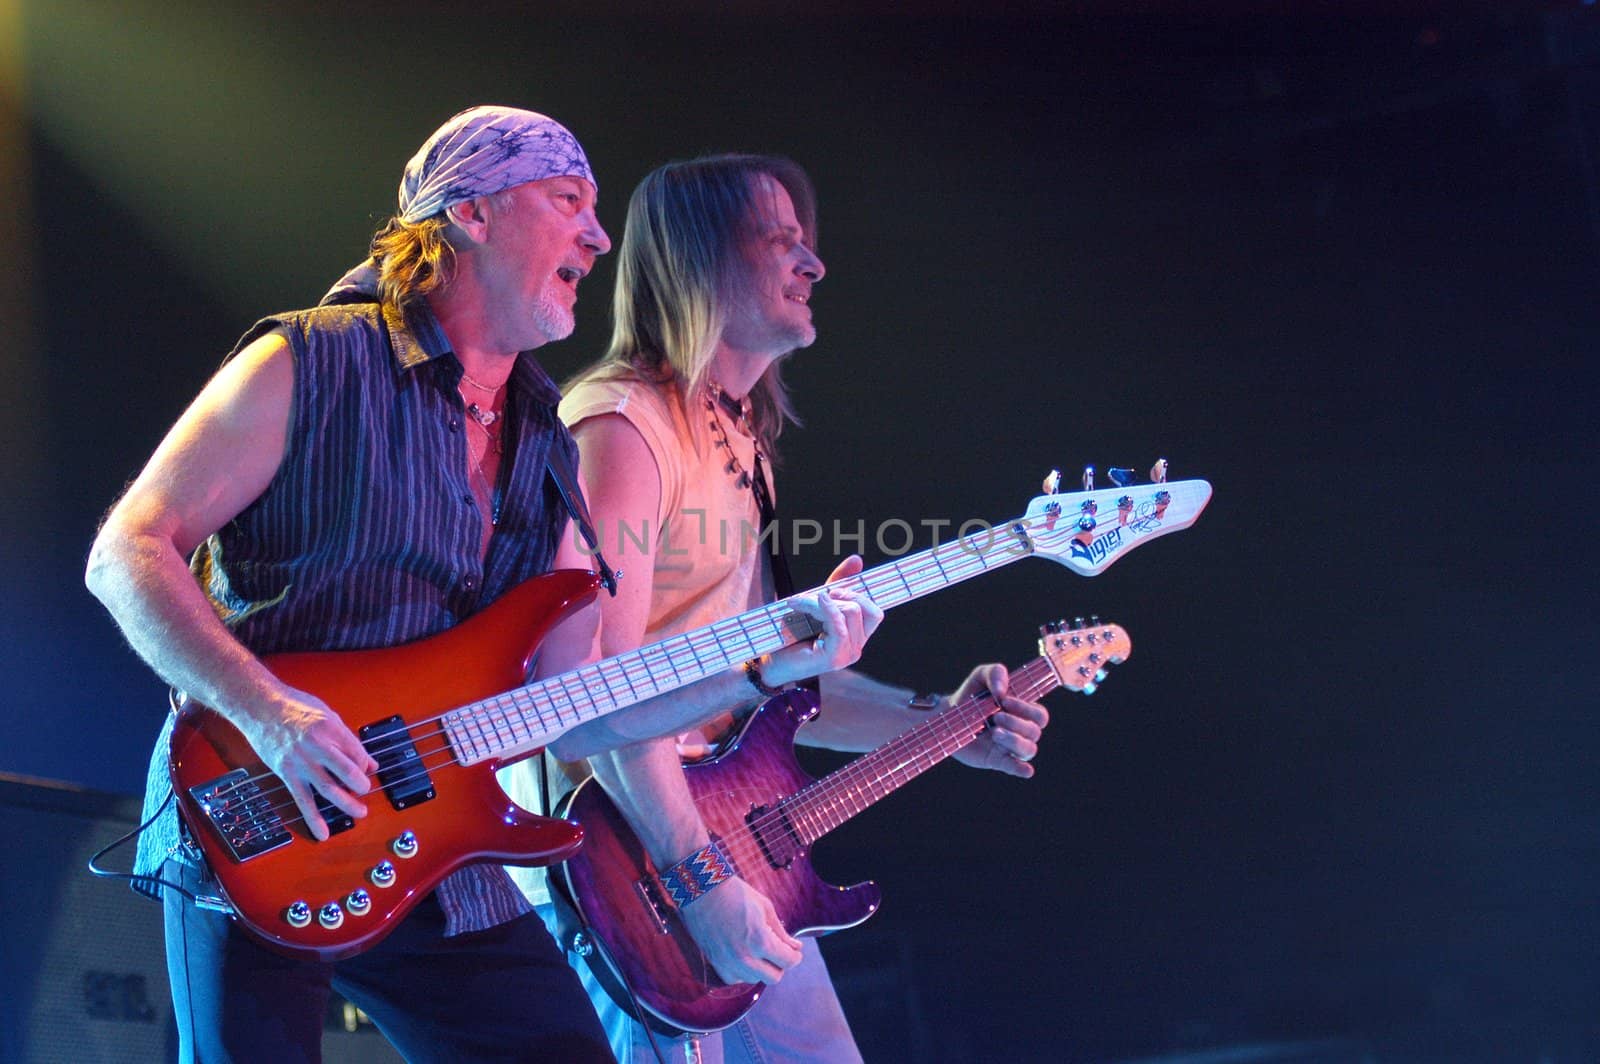 BRNO, CZECH REP., FEBRUARY-22: Steve Morse(R) and  Rodger Glover (L) from British band Deep Purple in performance at the hall Rondo February 22, 2006 in Brno, Czech Republic. The group arrived as part of tour for the new album Rapture Of The Deep. by haak78